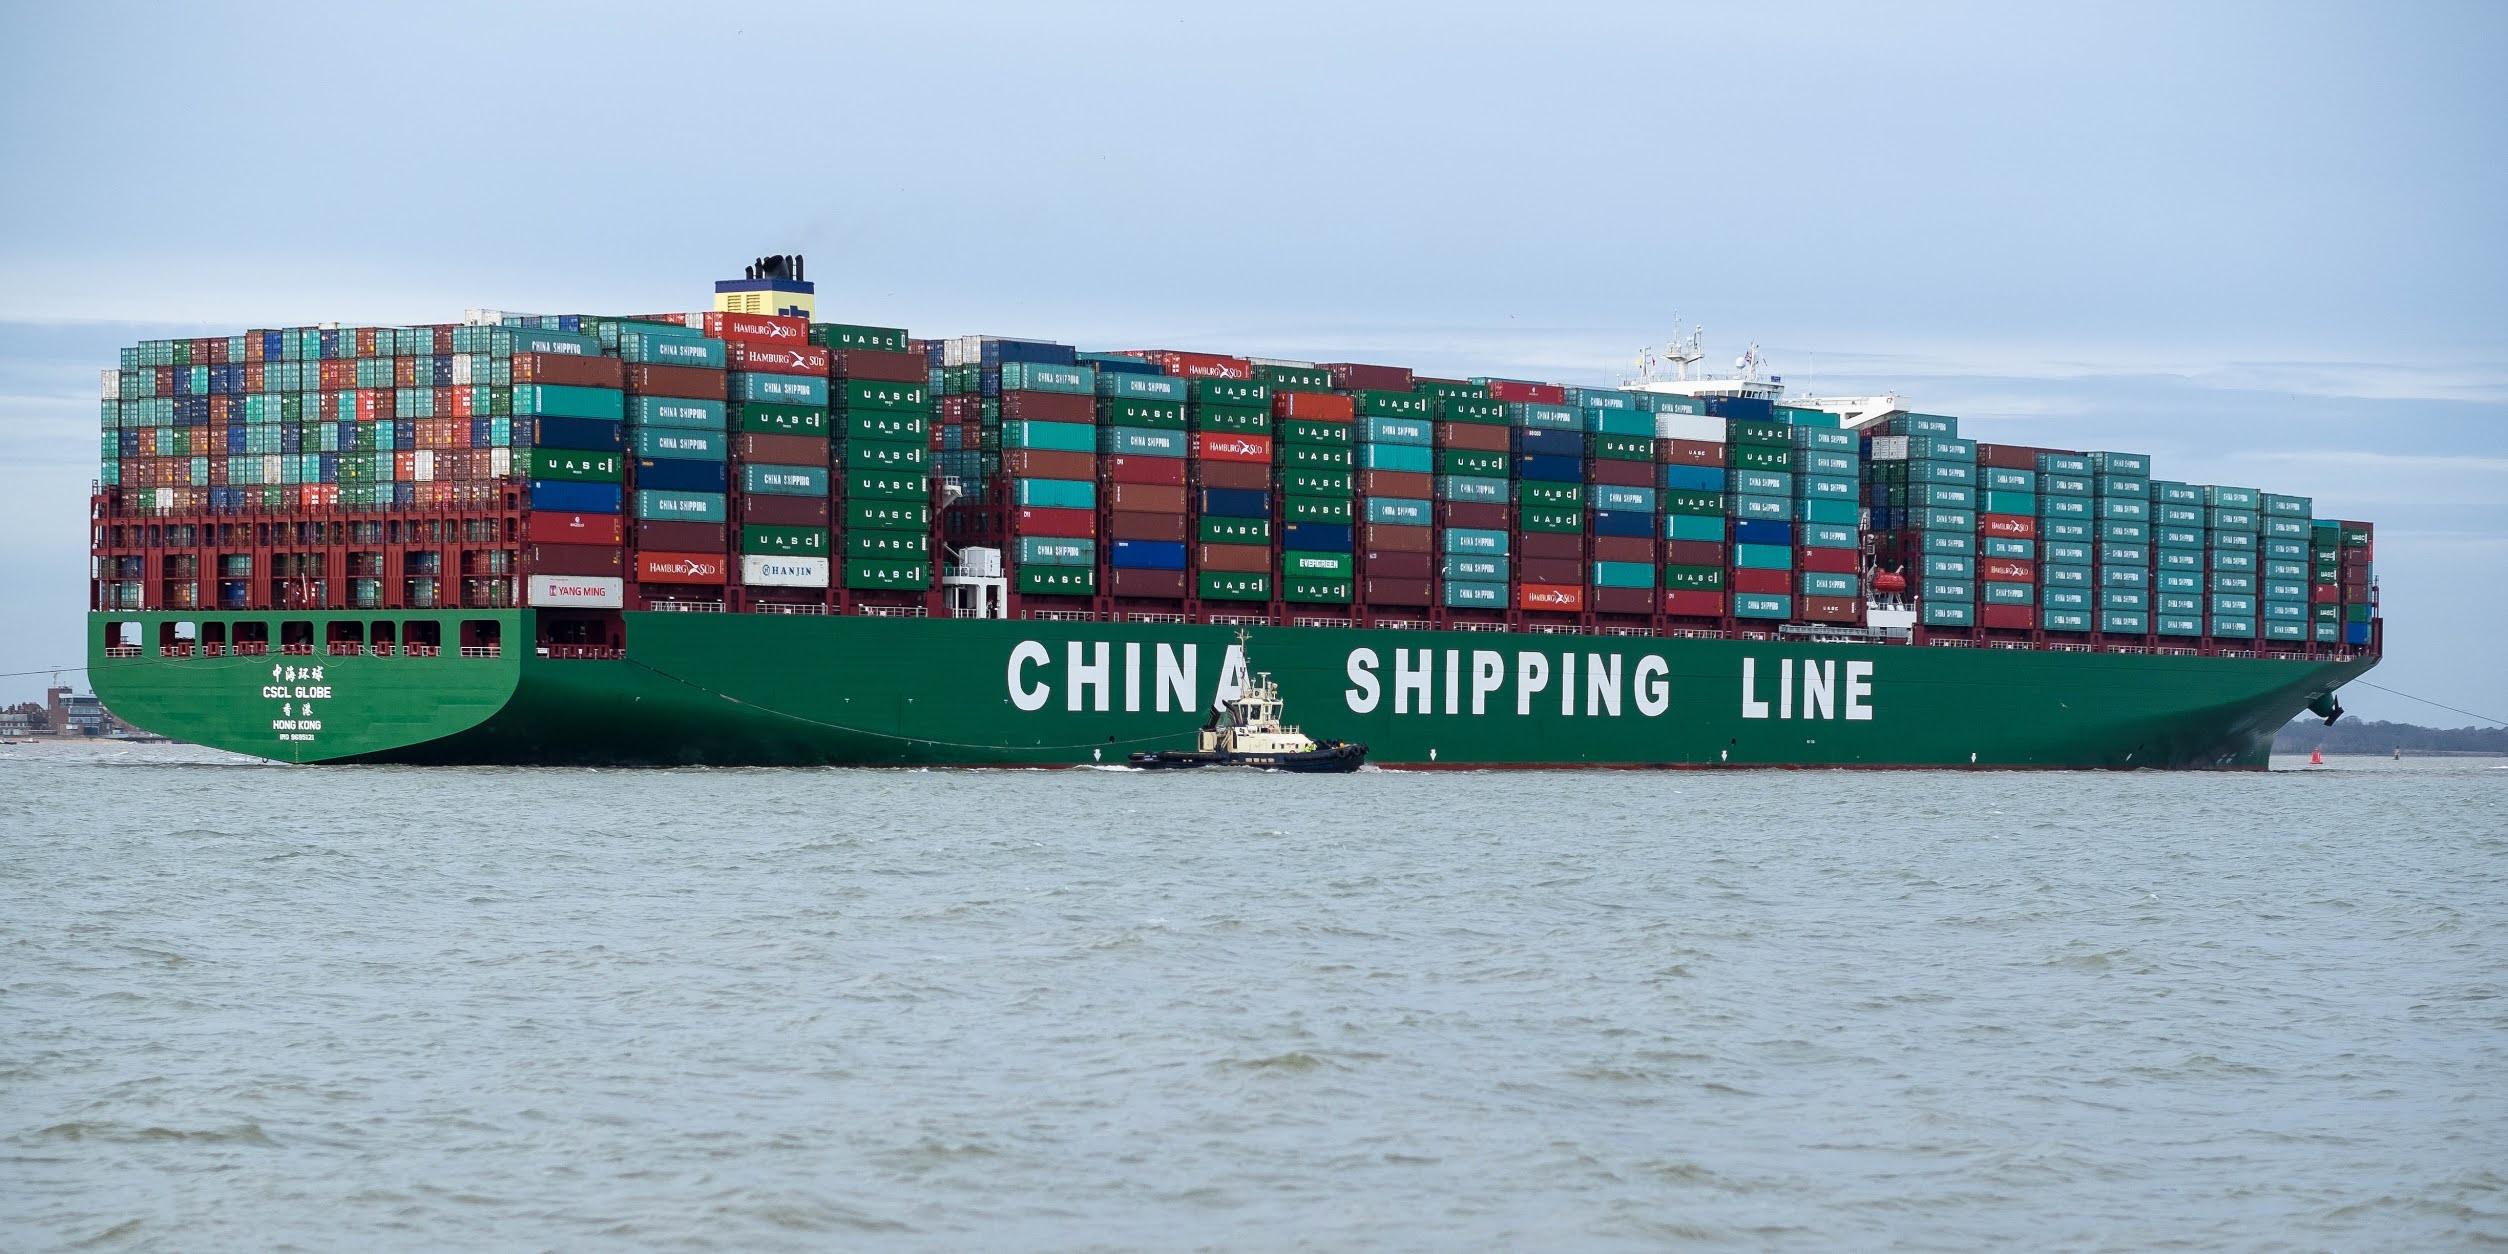 AFRICAN SHIPPING LINE: EXPERT REPORT: AN 'AGGRESSIVE FIGHT' OVER CONTAINERS  IS CAUSING SHIPPING COSTS TO ROCKET TO 300%